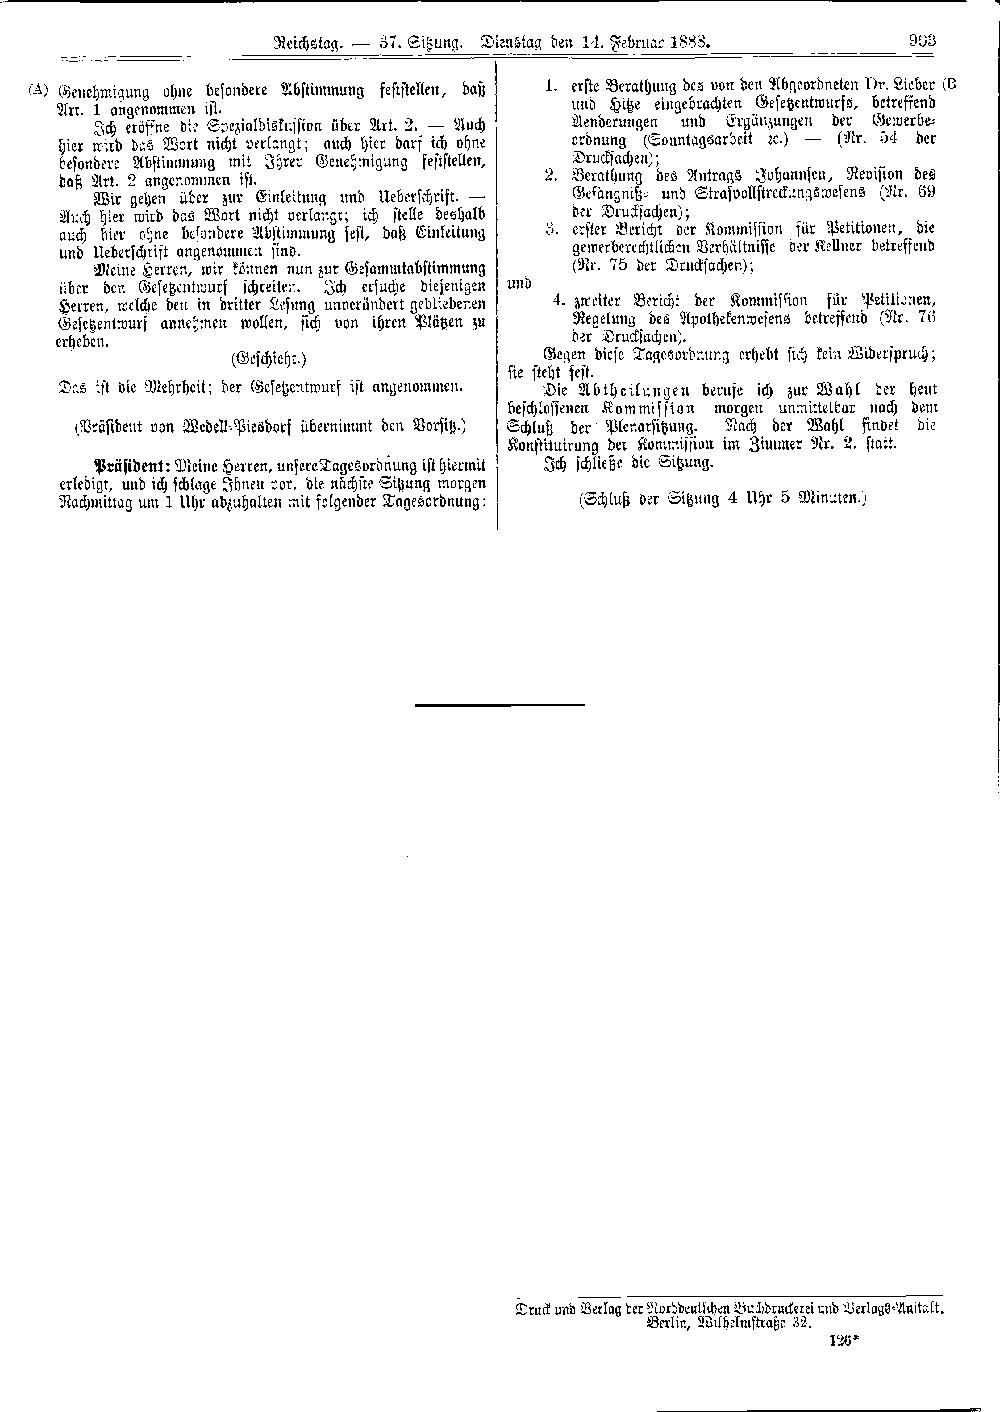 Scan of page 903